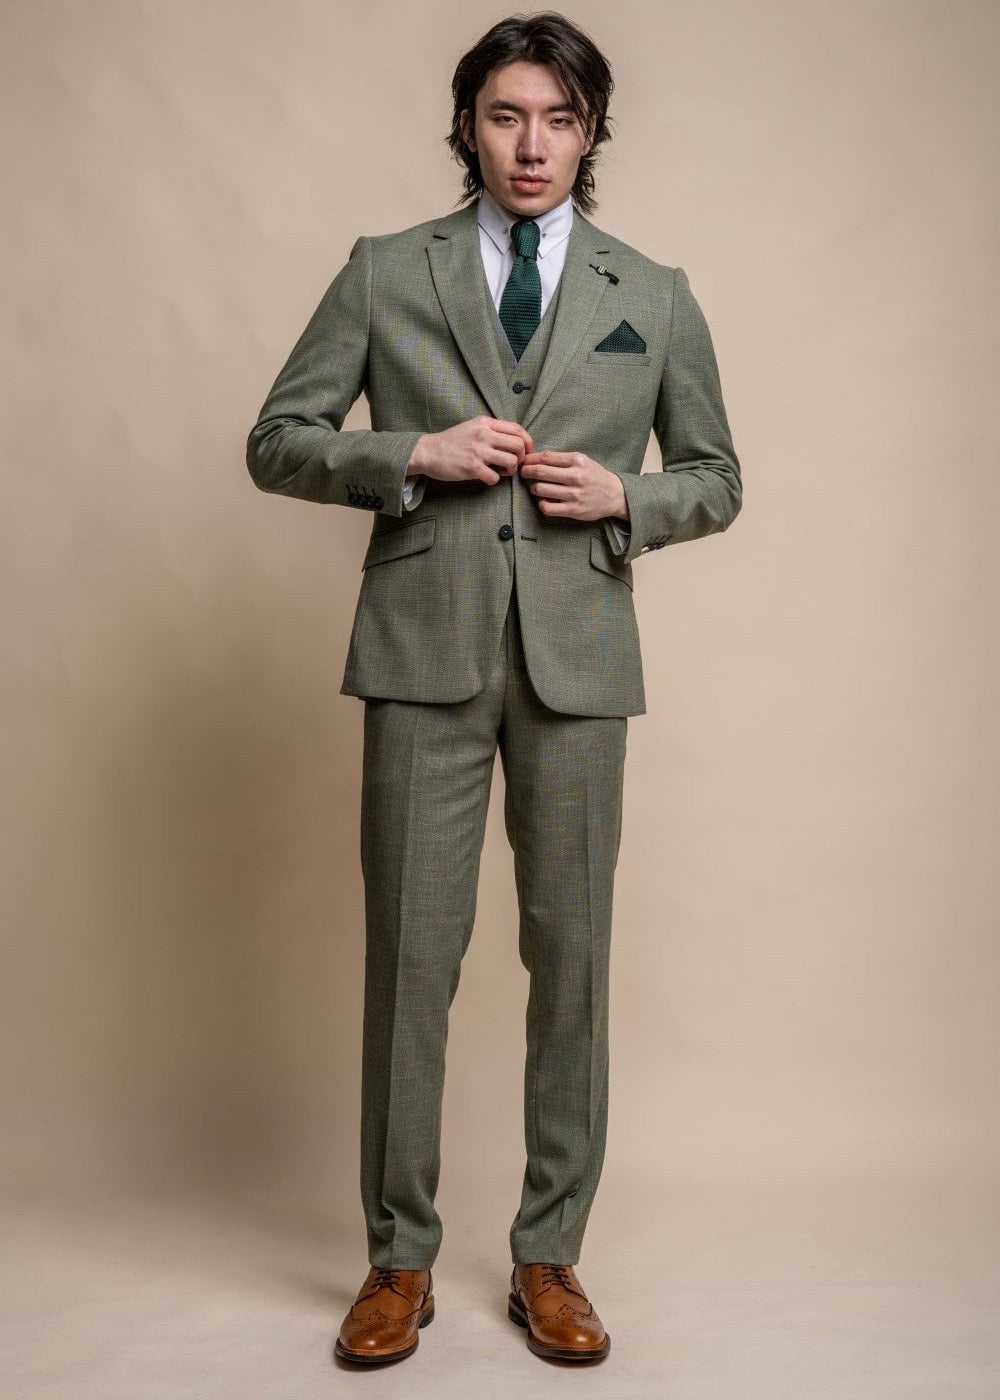 Miami sage suit for men - full suit shown from front